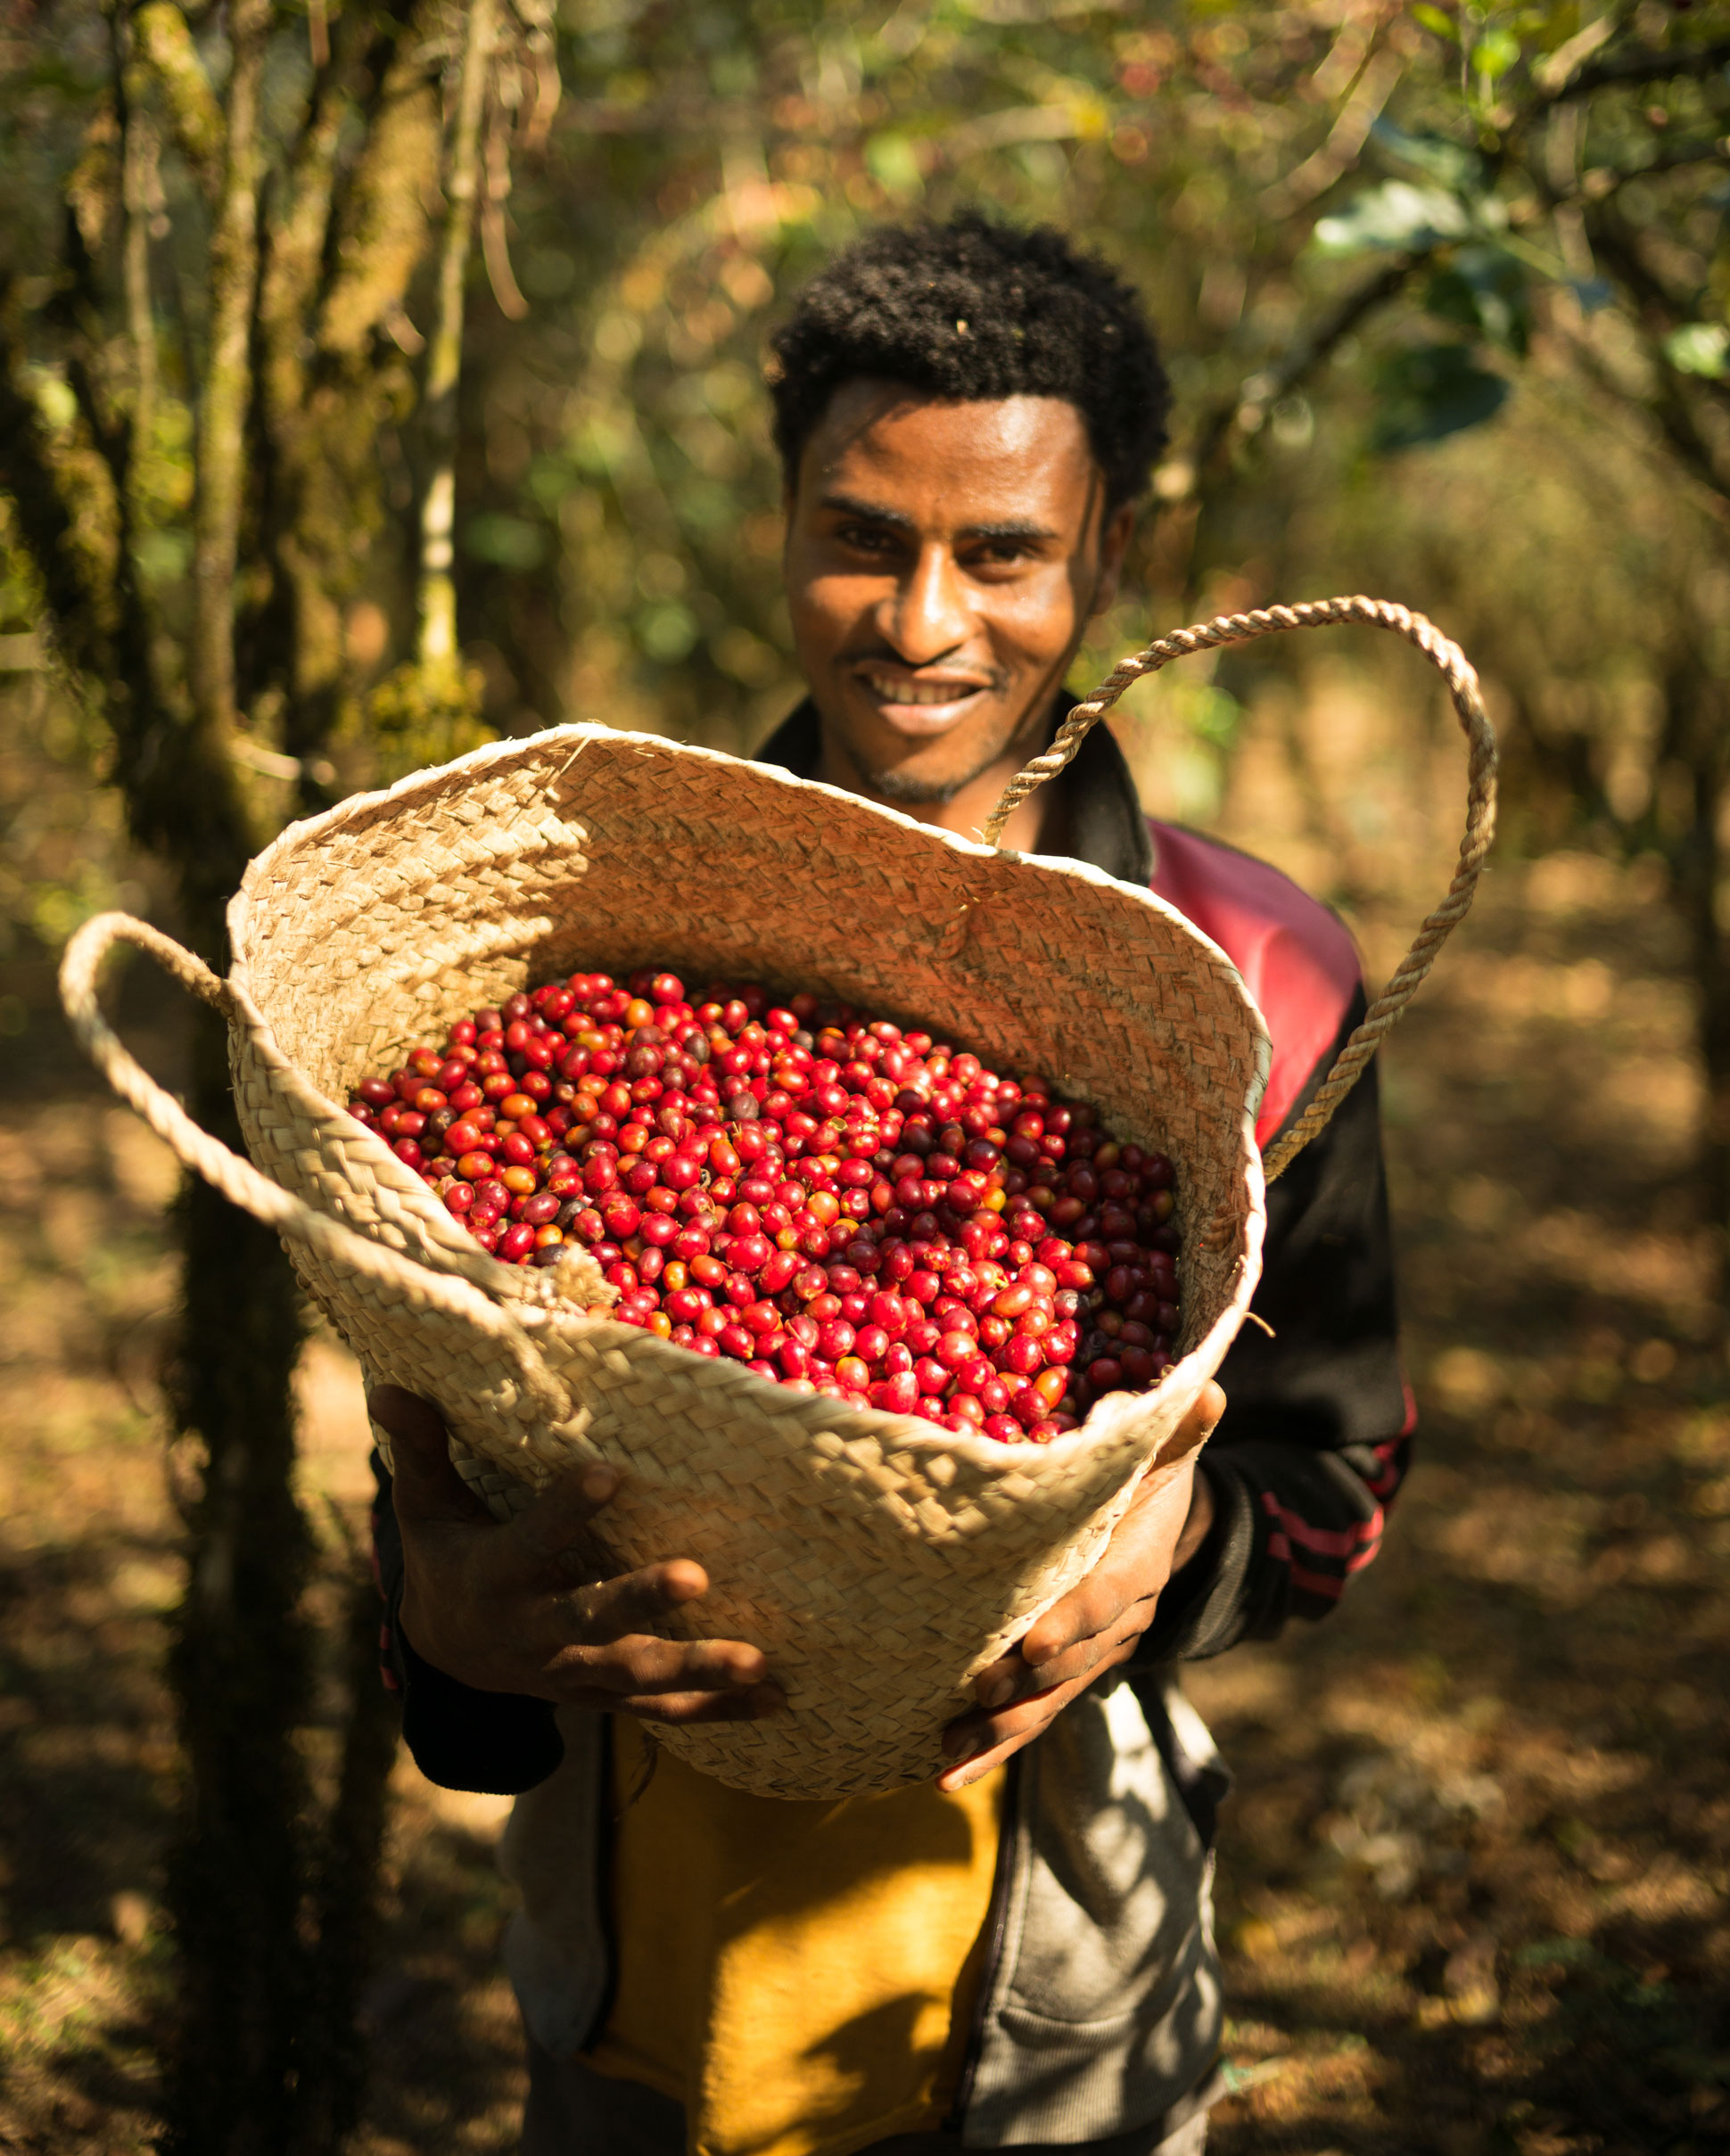 Coffee farmer holding a bag full of red coffee berries